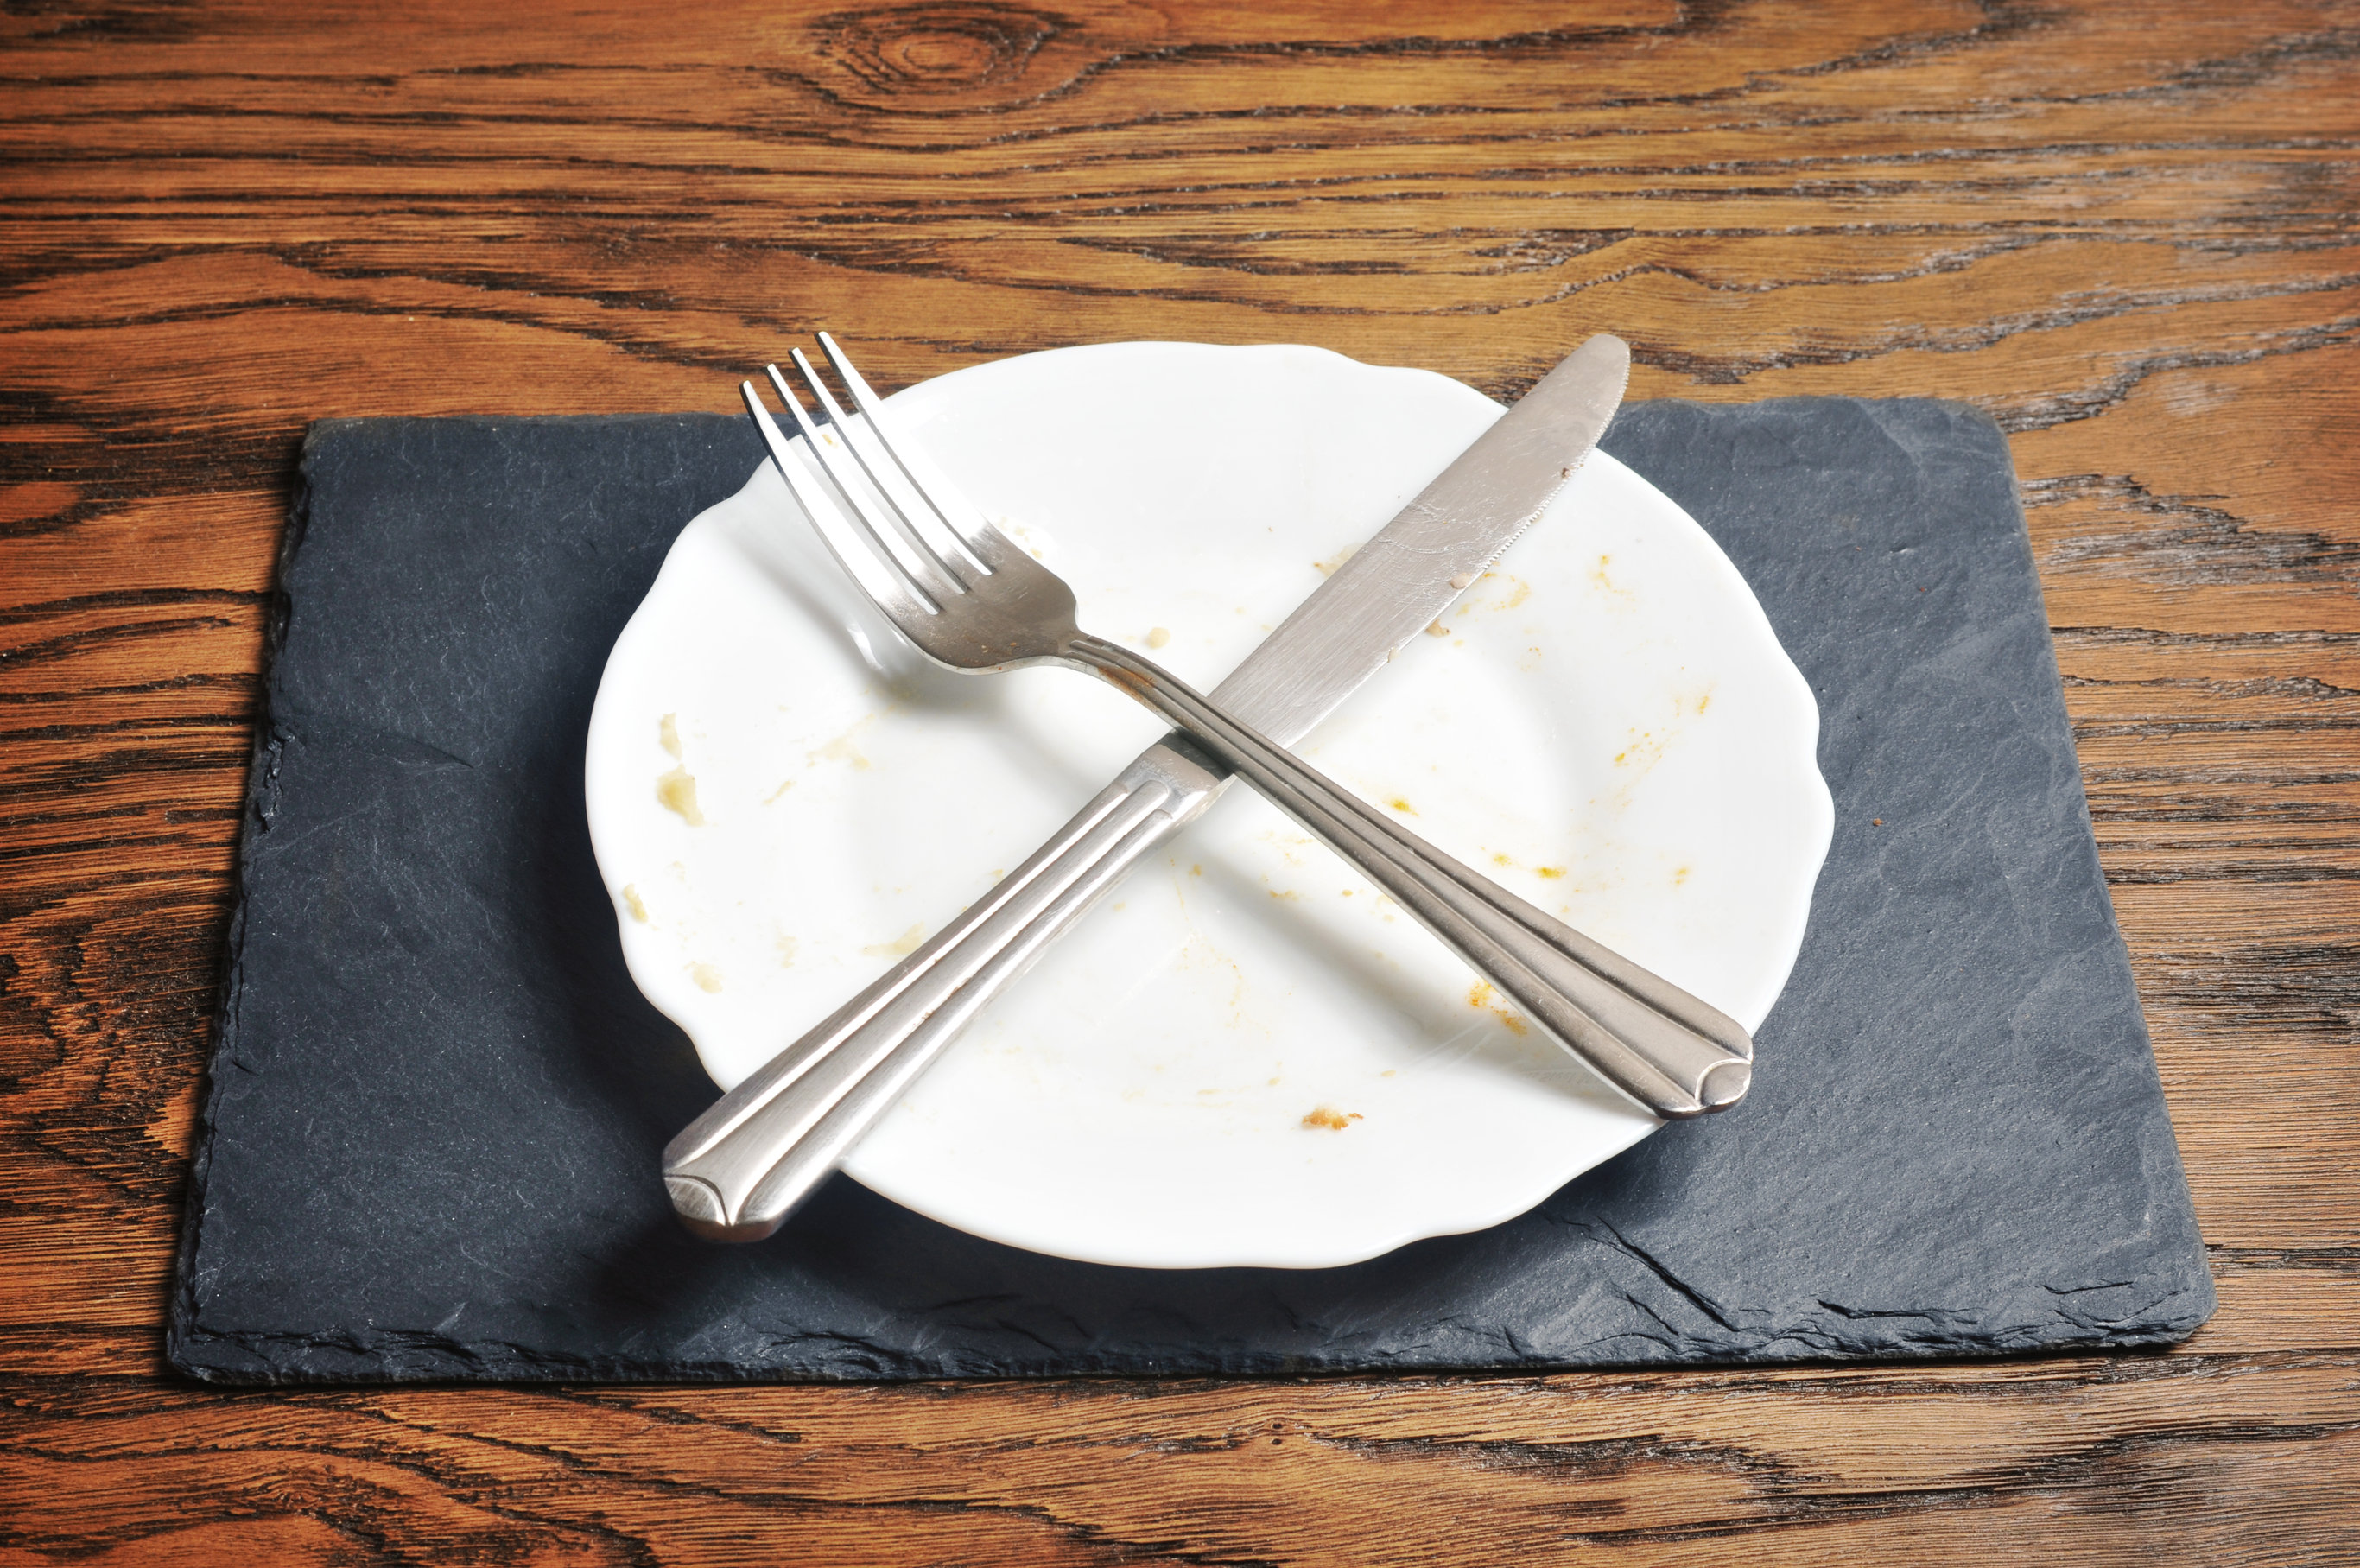 8 signs your intermittent fasting diet has become unsafe or unhealthy